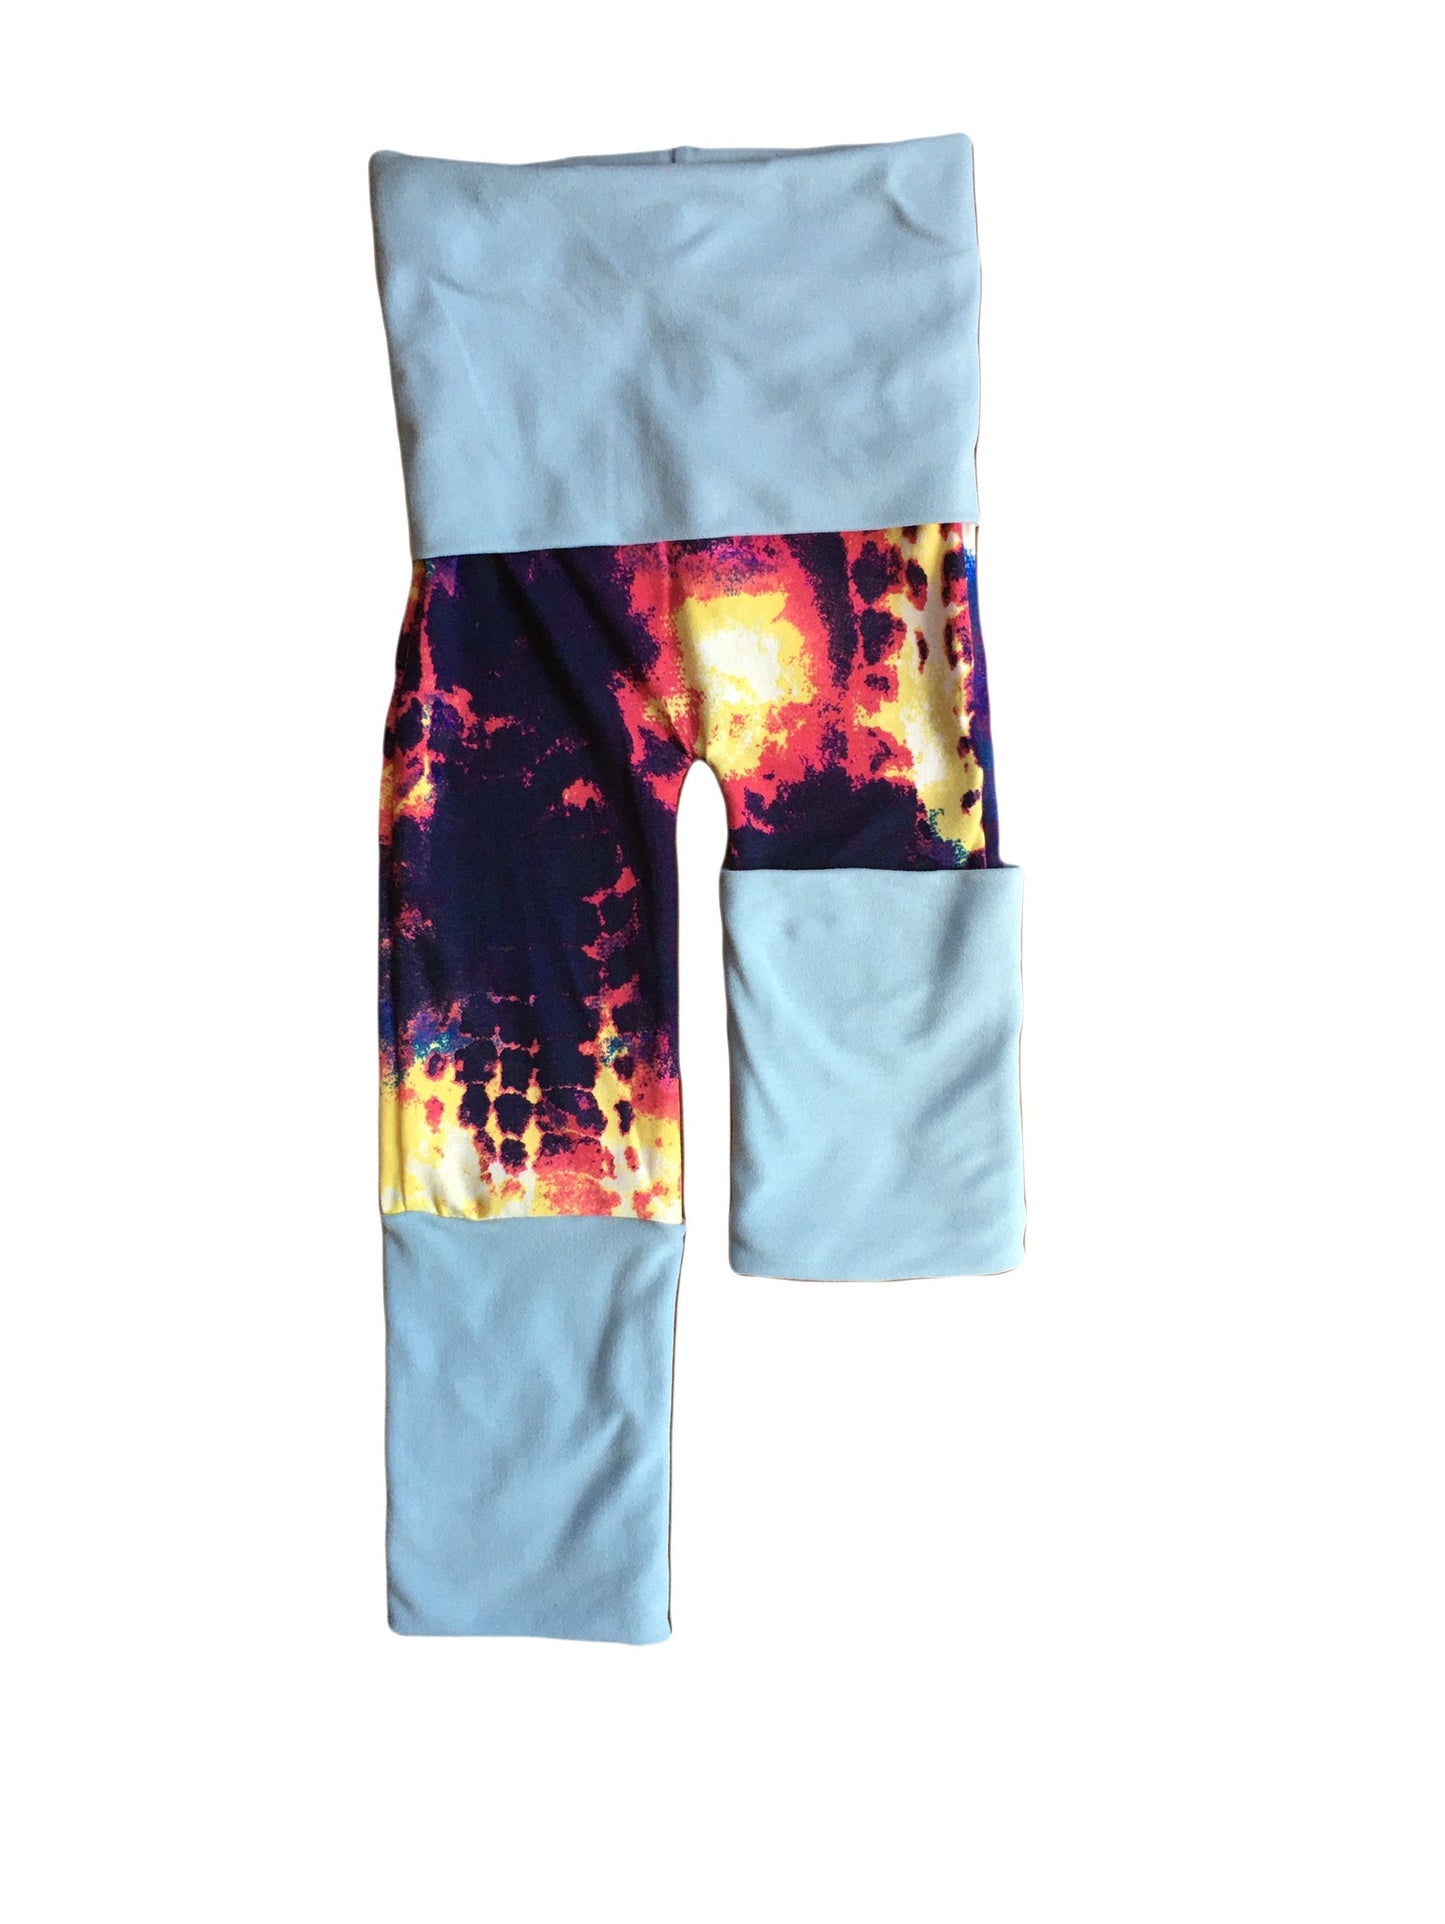 Adjustable Pants - Tie-Dye with Light Blue